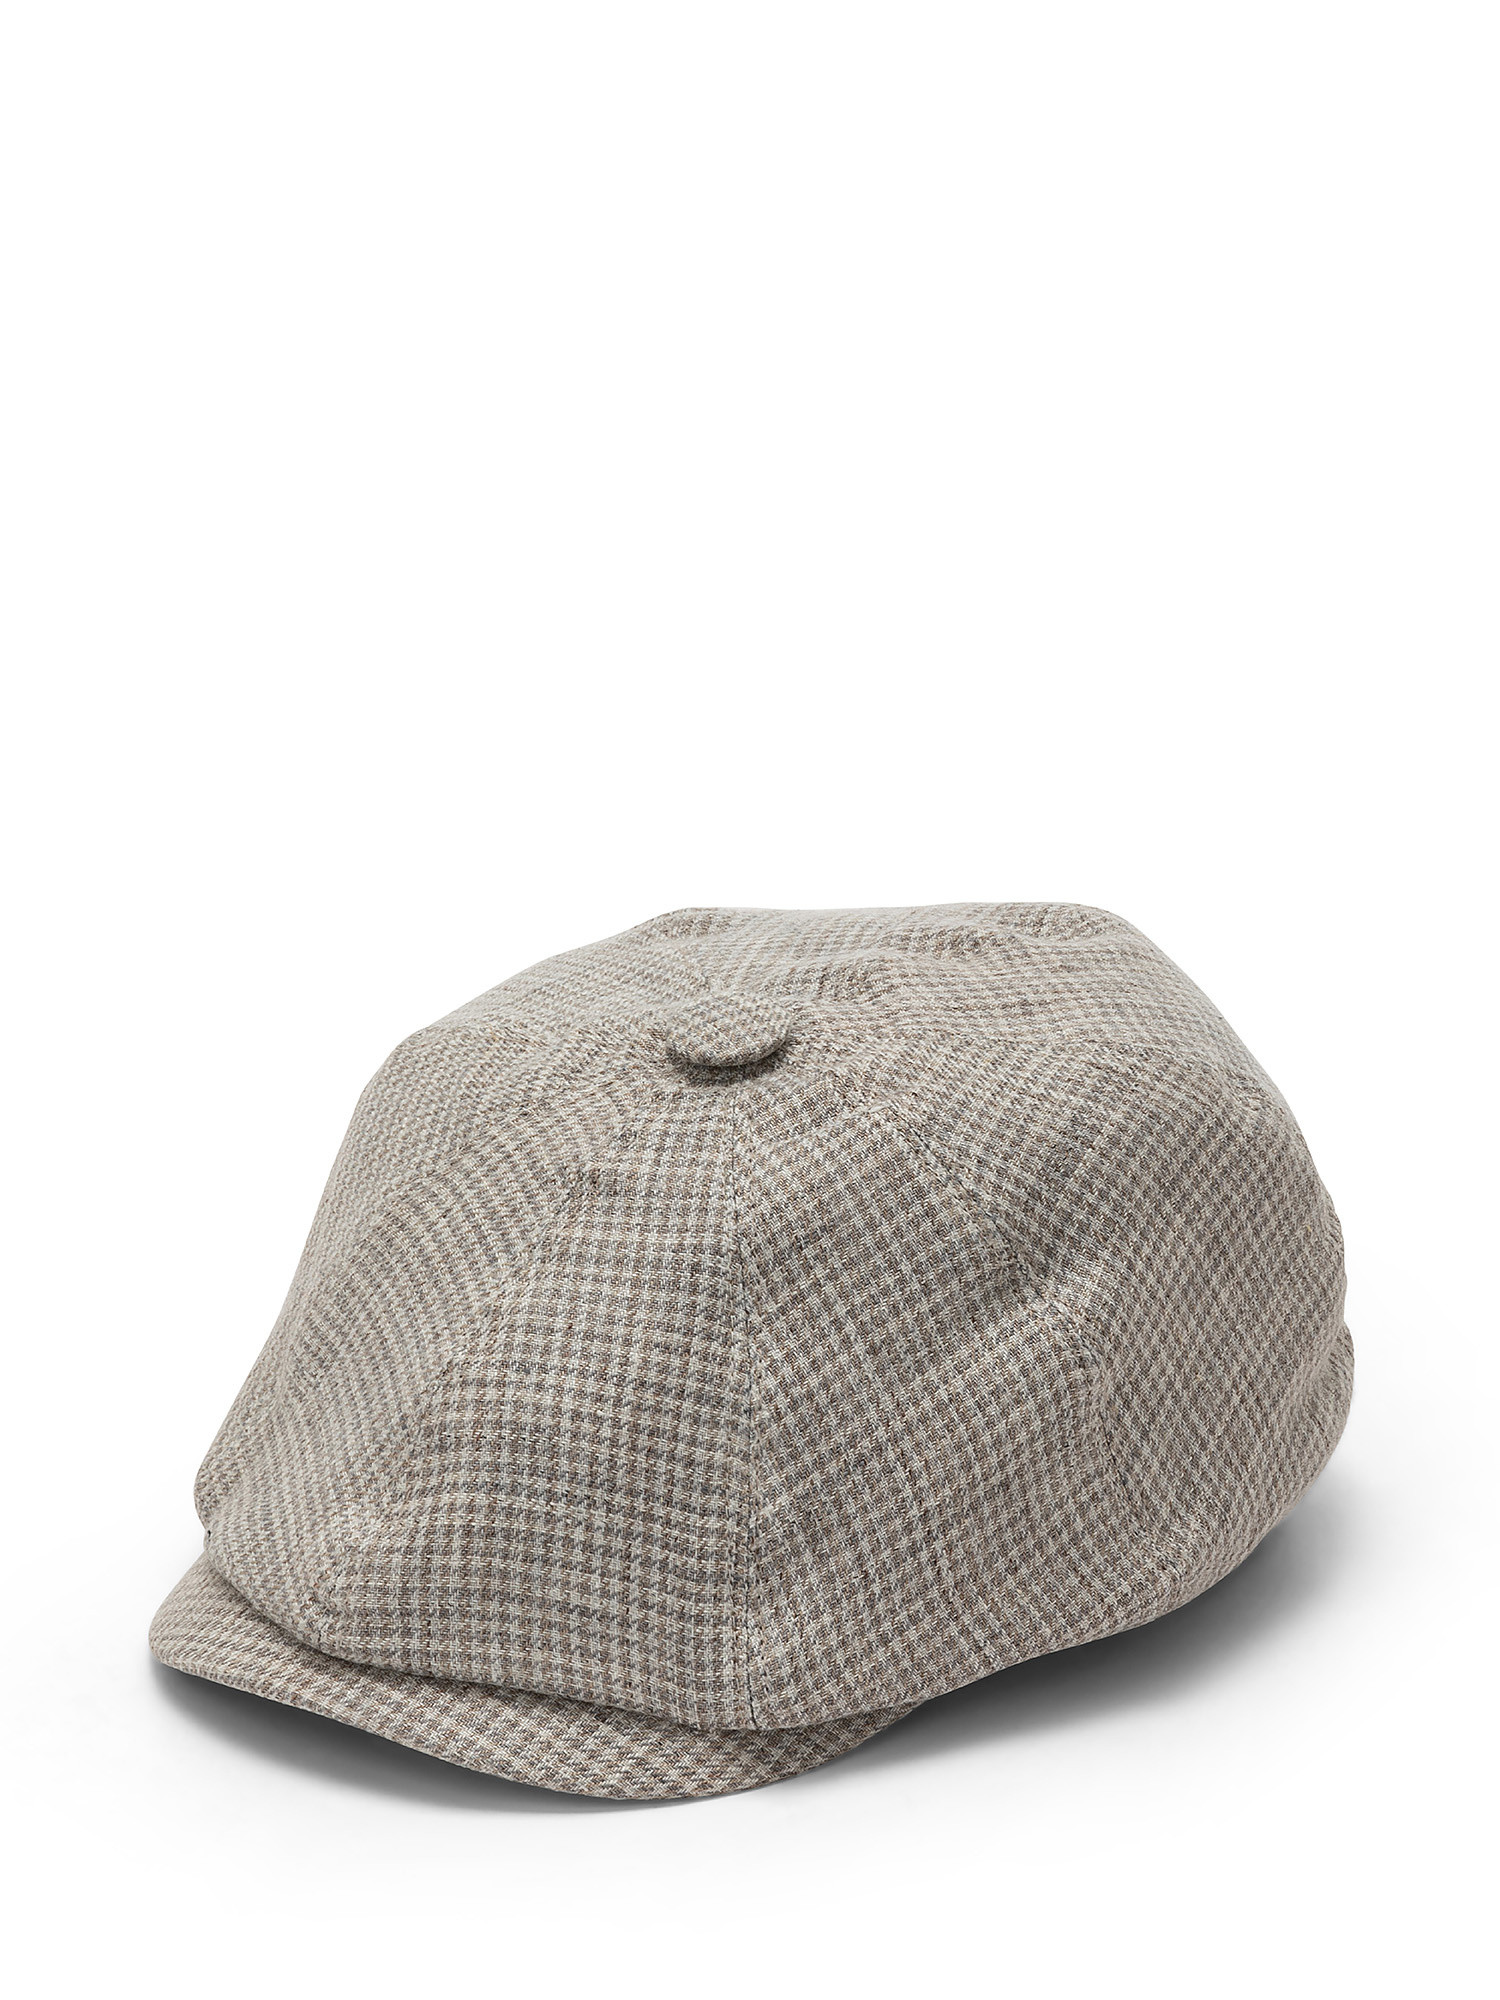 Houndstooth fabric cap, Grey, large image number 0